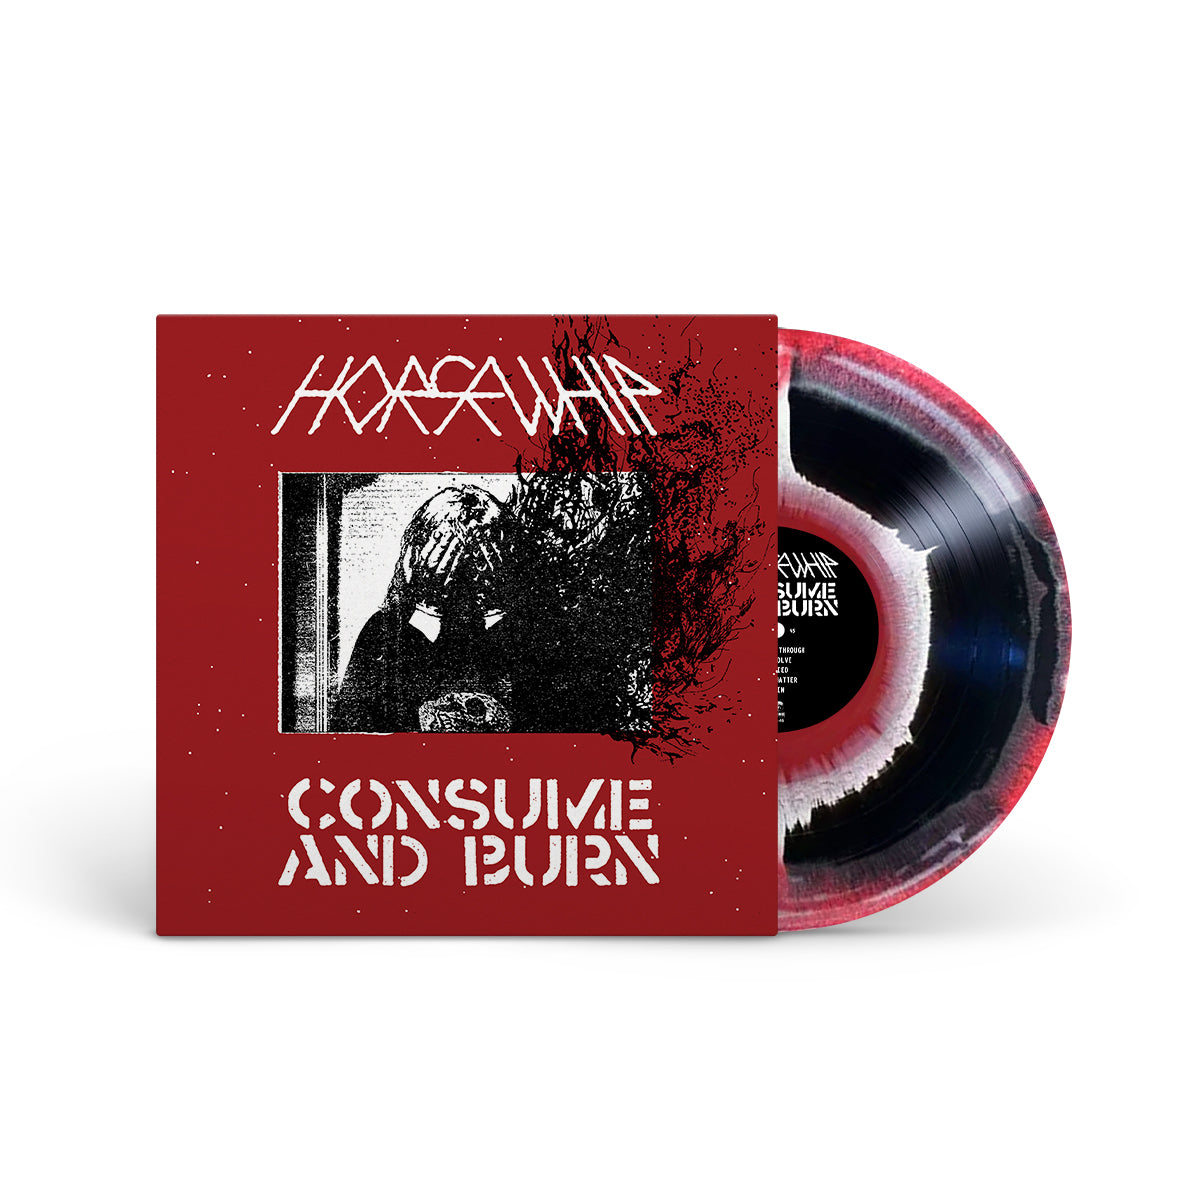 HORSEWHIP "Consume And Burn" LP